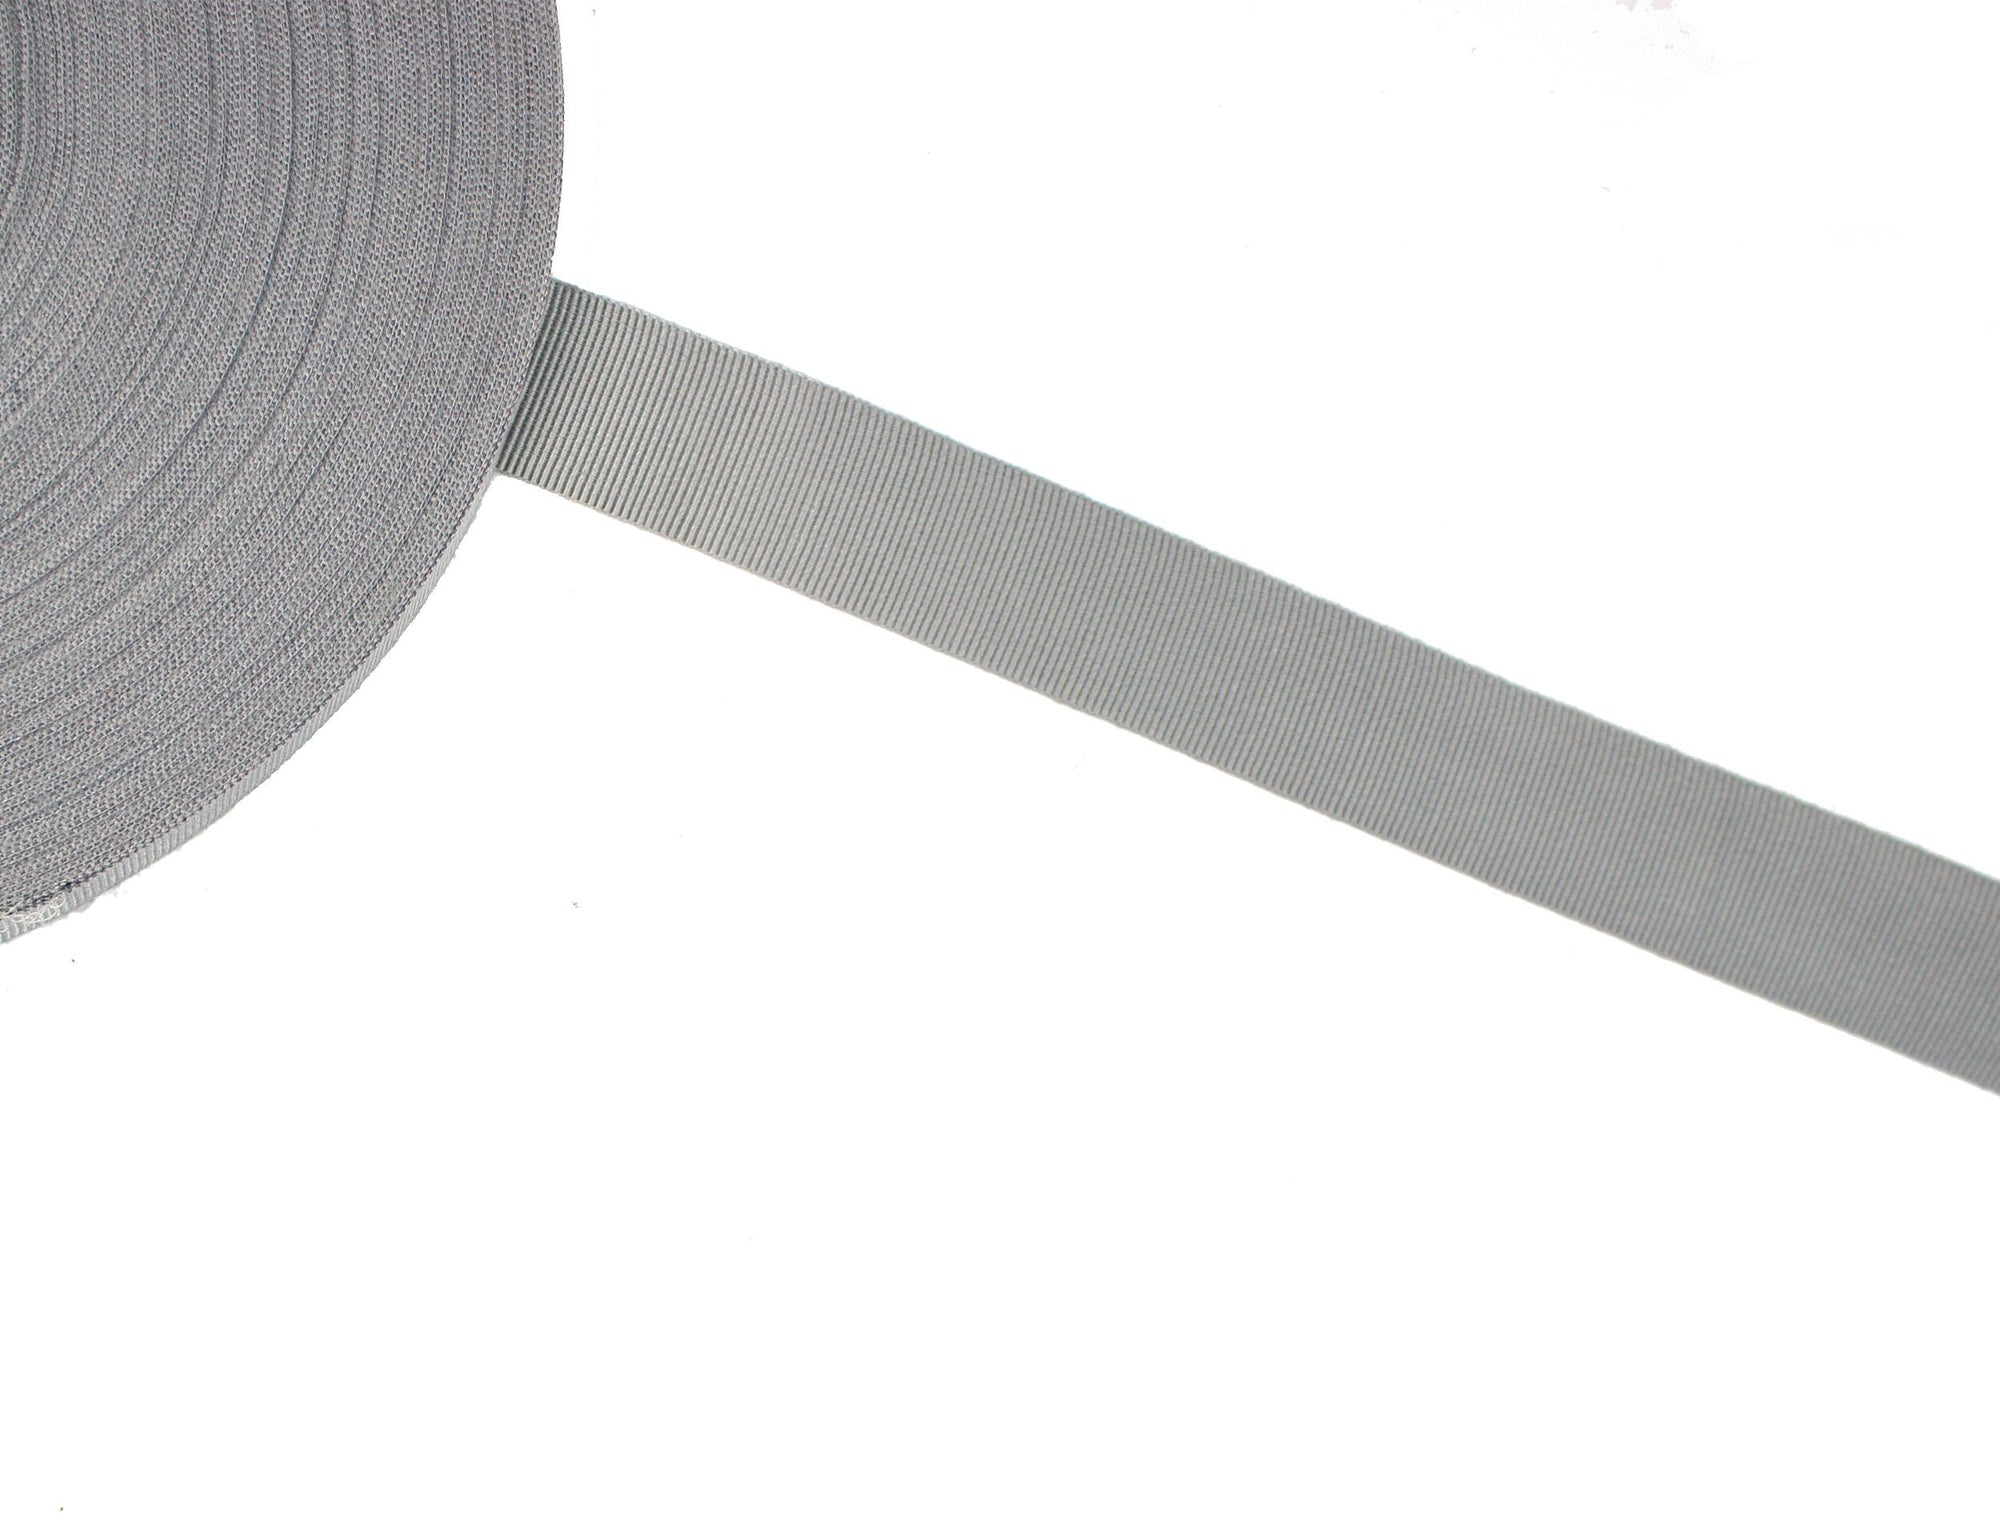 Vintage Grosgrain Ribbon Gray  Measures 23 mm Wide - Sold by the Yard